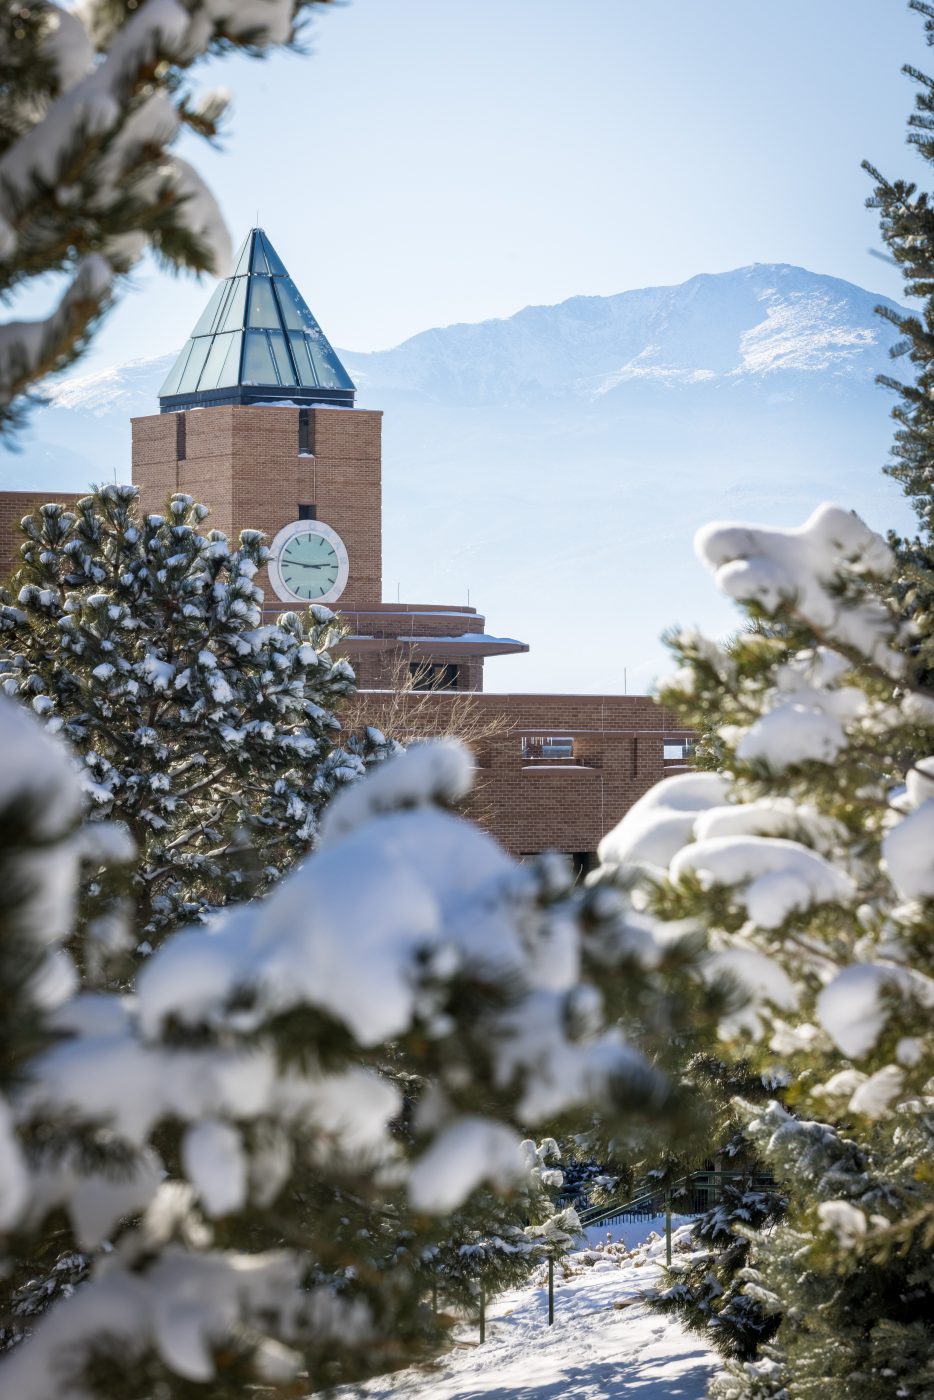 Snow covered trees in front of El Pomar Center on the UCCS campus with a misty Pikes Peak in the background.